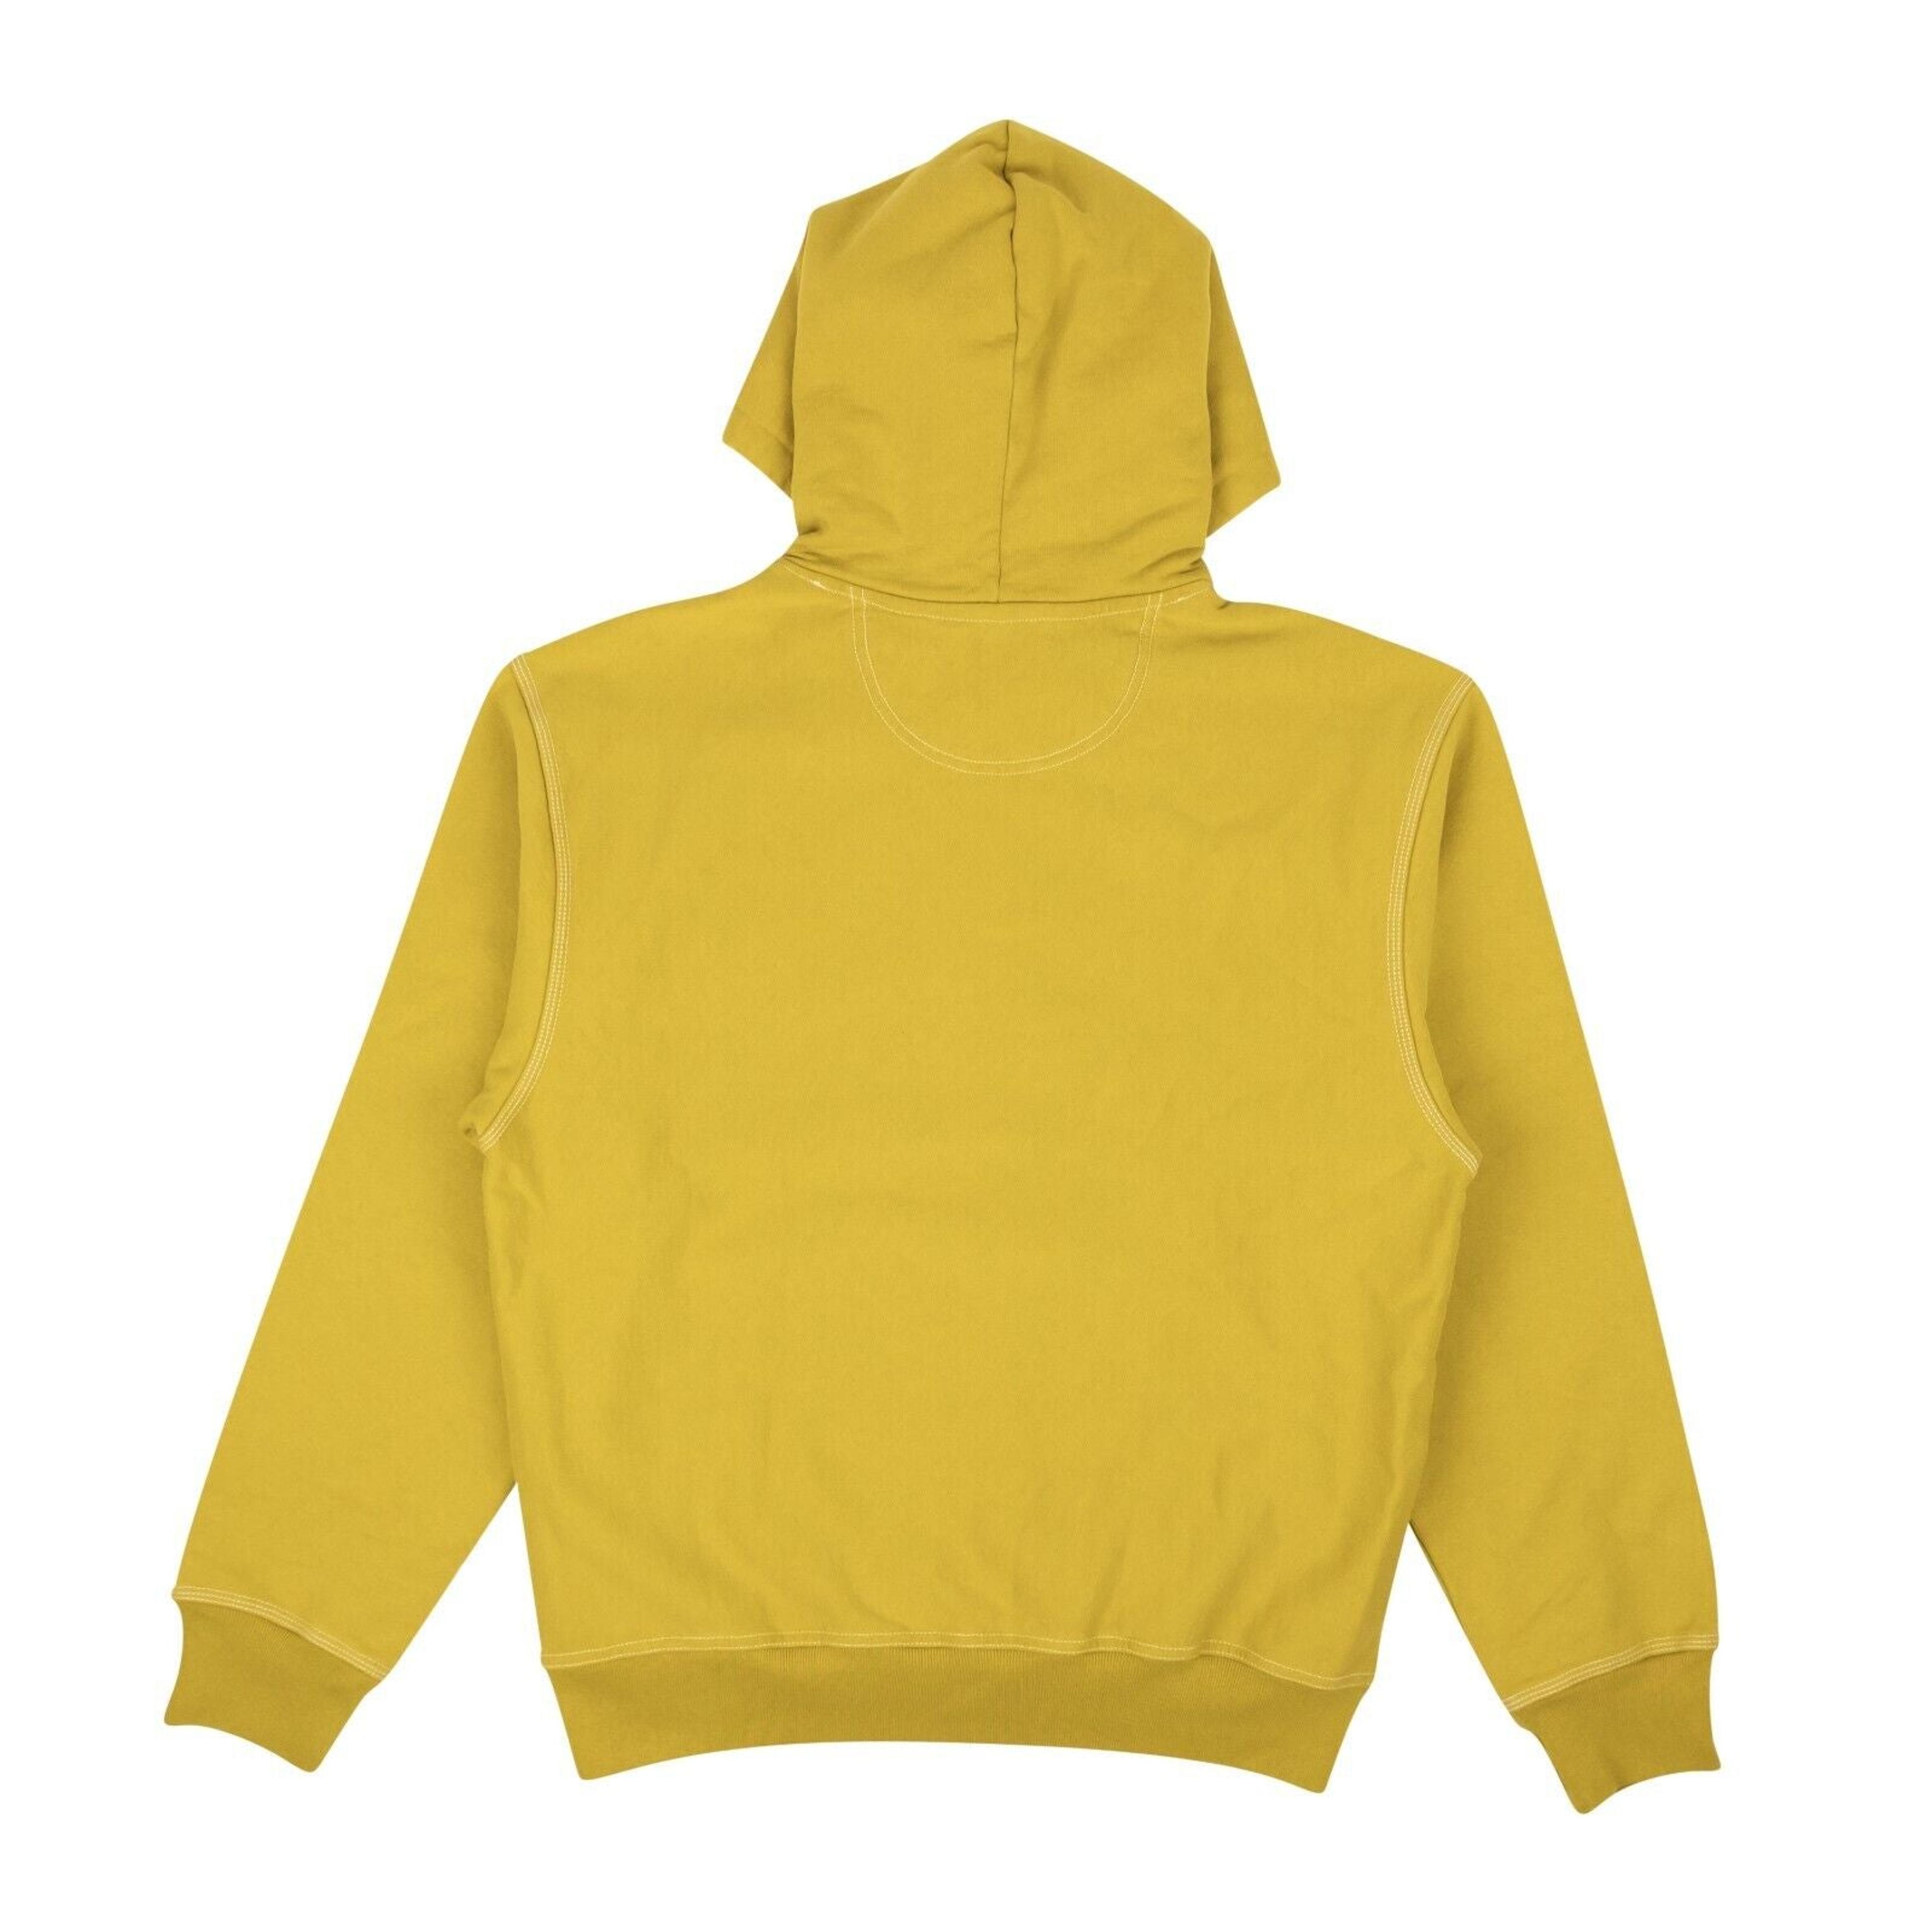 Alternate View 2 of Stussy Contrast Stitch Label Hoodie - Gold